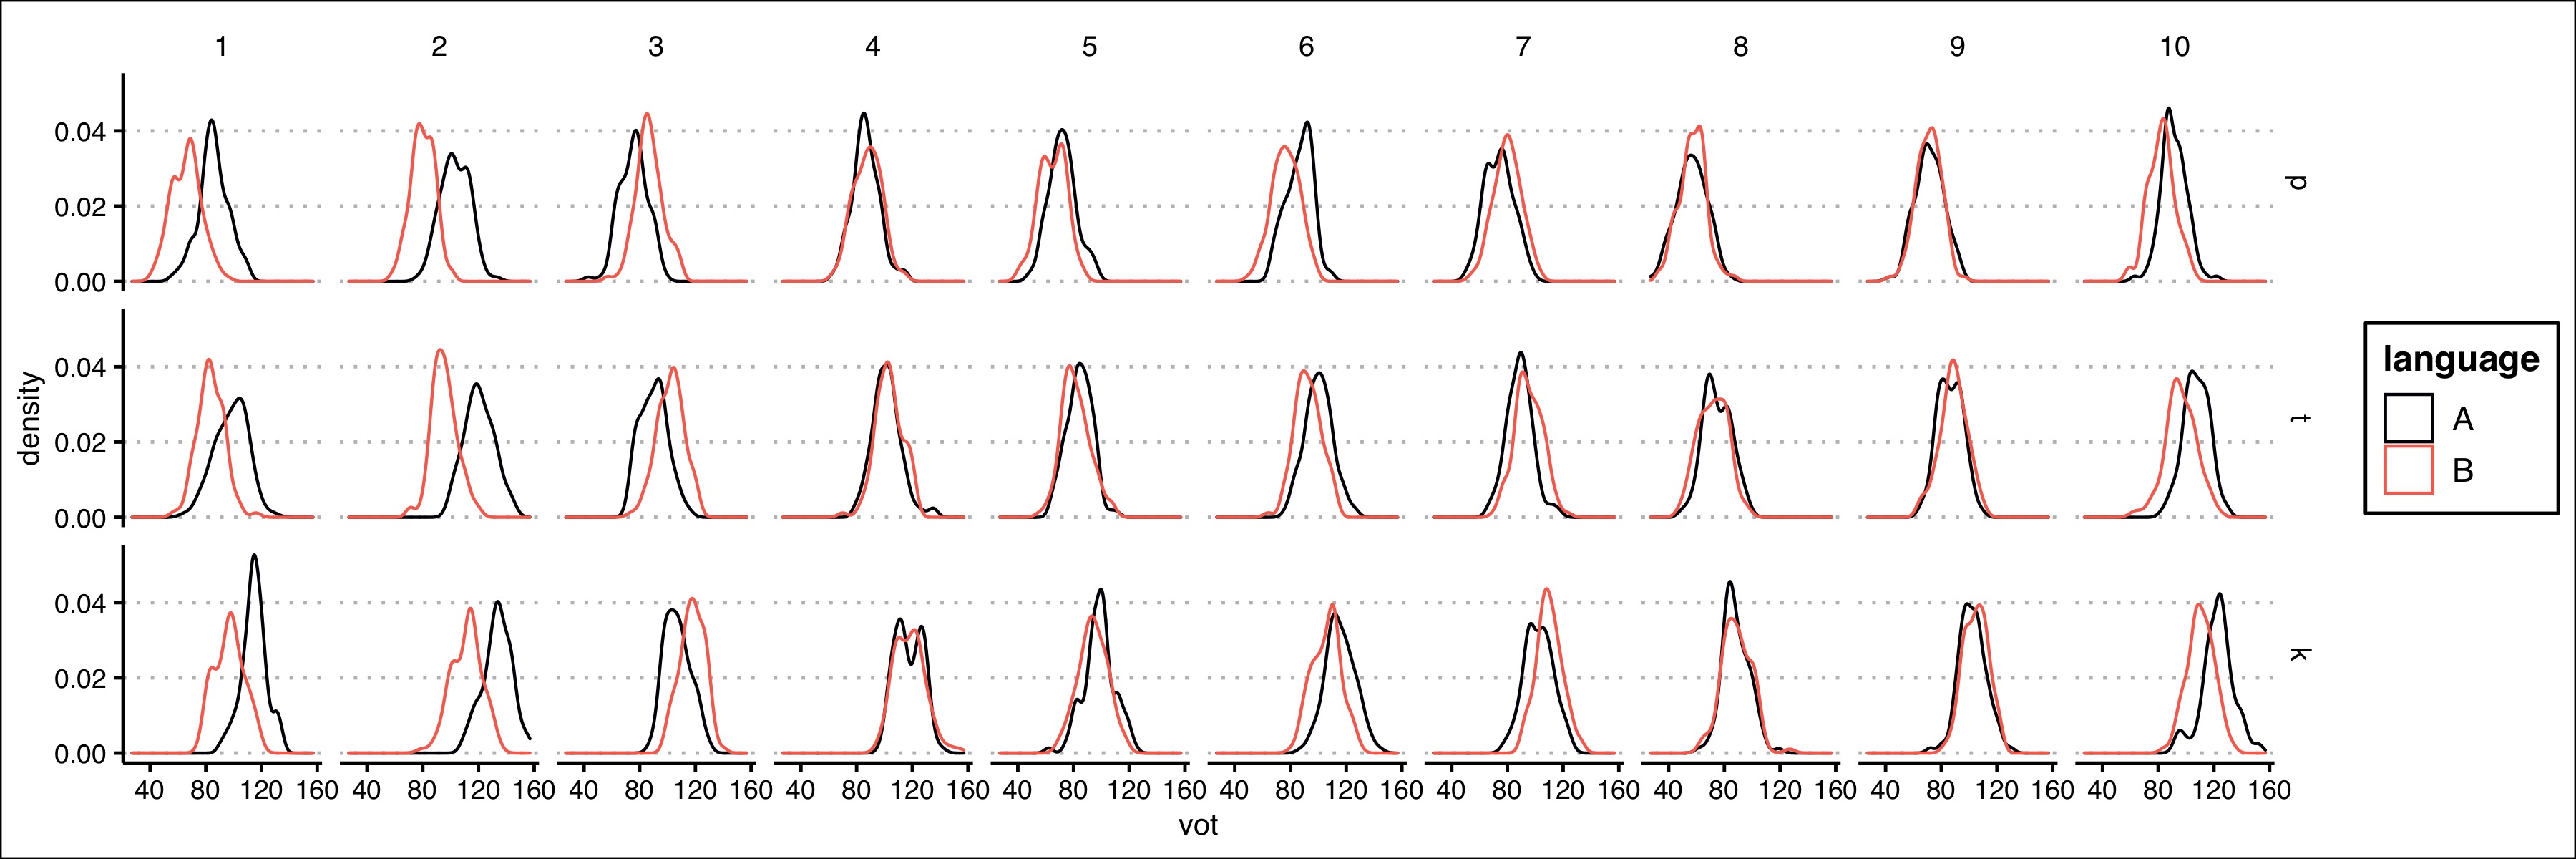 Figure depicting voice onset time for Language A in black and Language B in orange, for P, T, and K simulated productions by the first 10 individuals. The pattern here reflects the decisions made in simulation. P tends to be shorter than T, which tends to be shorter than K. There is individual variation in how far apart languages are.